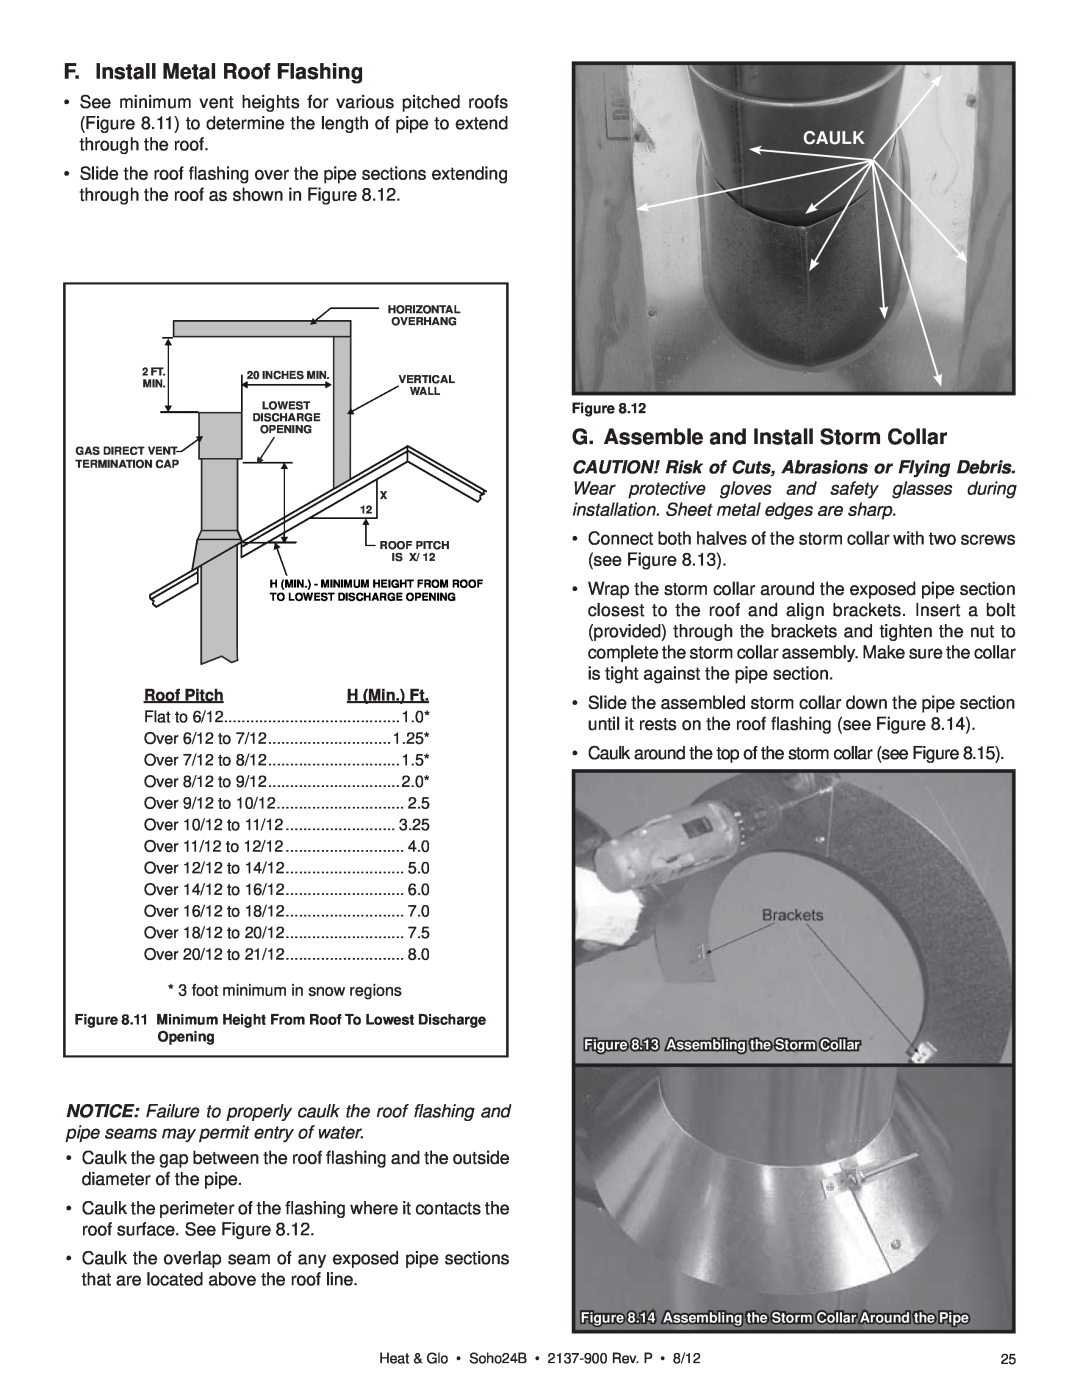 Heat & Glo LifeStyle 2137-900 owner manual F. Install Metal Roof Flashing, G. Assemble and Install Storm Collar, Caulk 